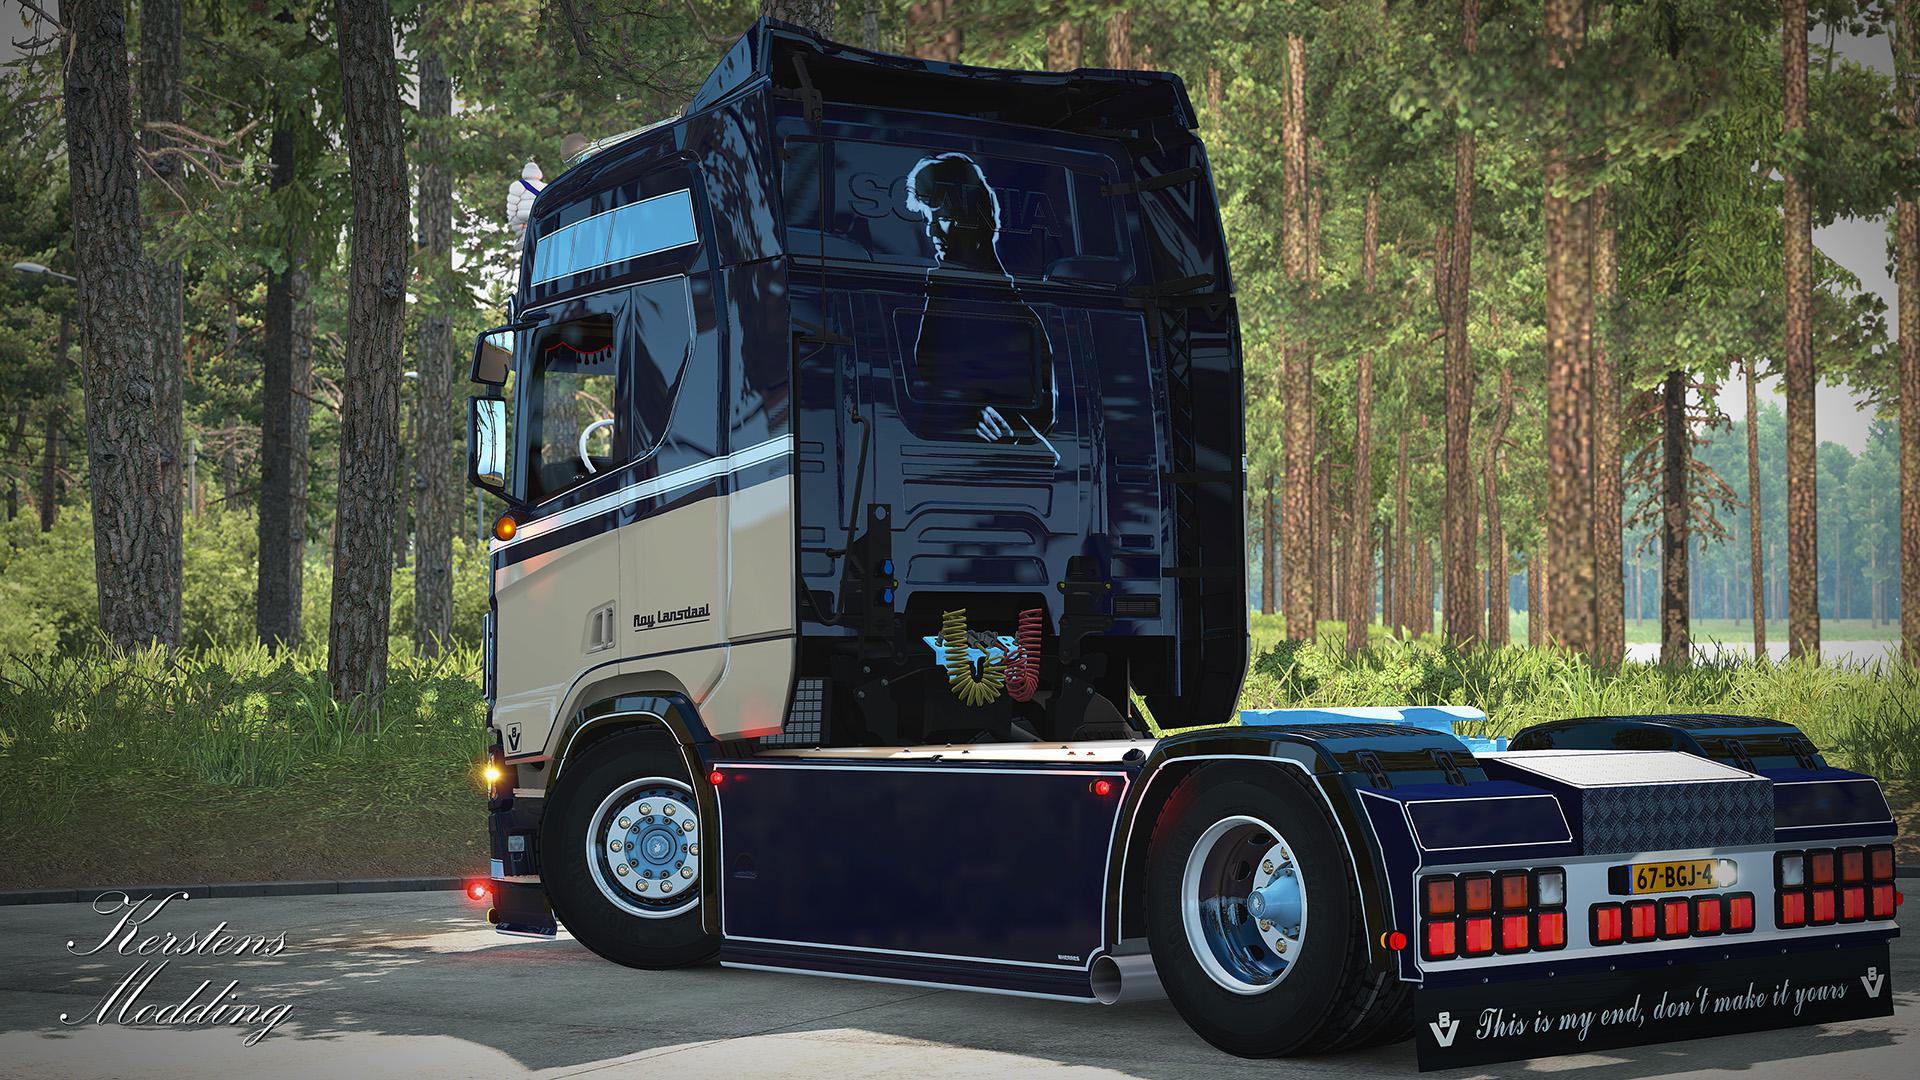 download ets 2mod for free